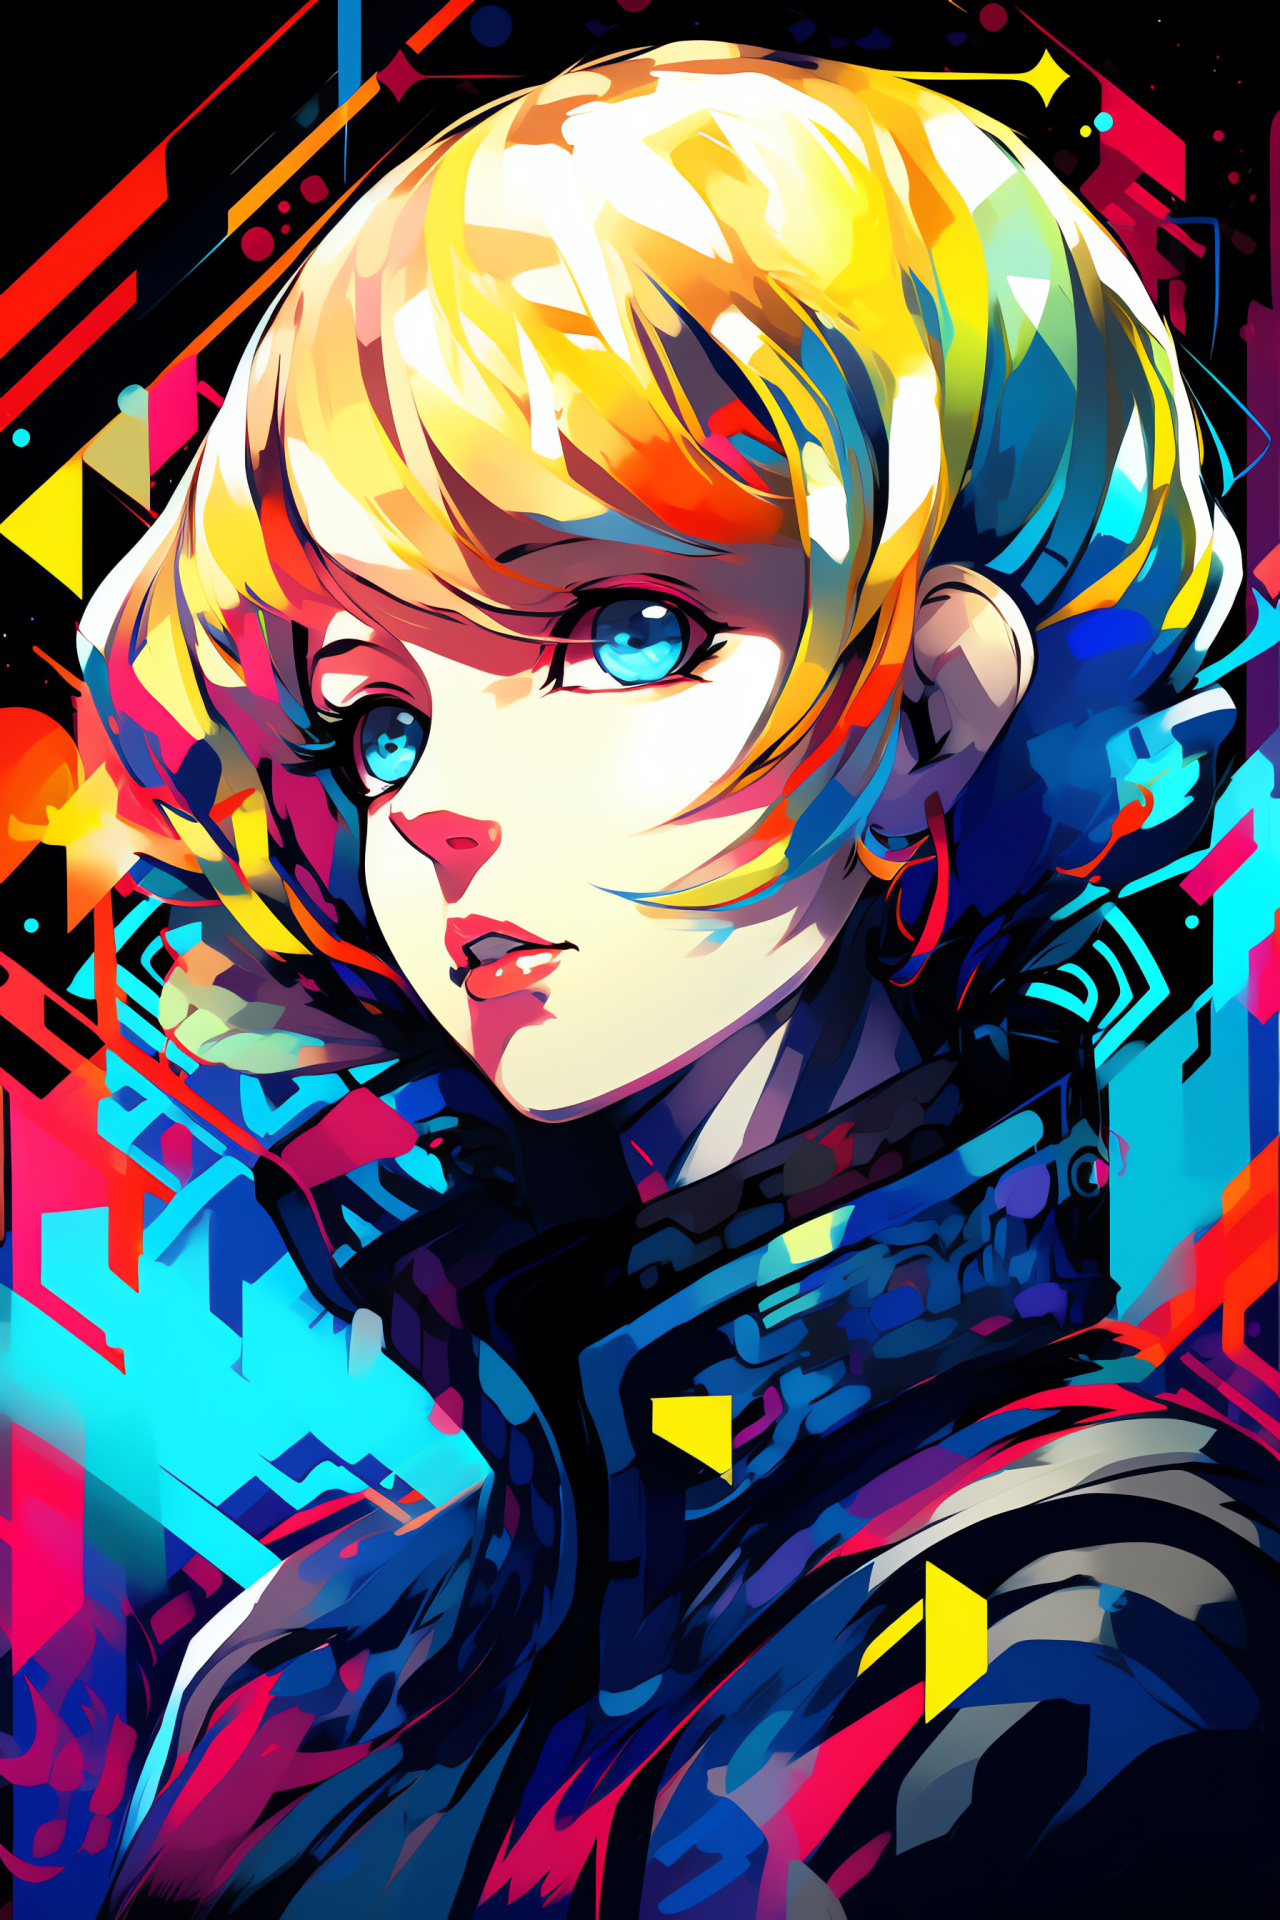 Persona 3 navigational gear, Luminous display, Technicolor waves, Polychromatic canvas, Dynamic helix, HD Phone Image